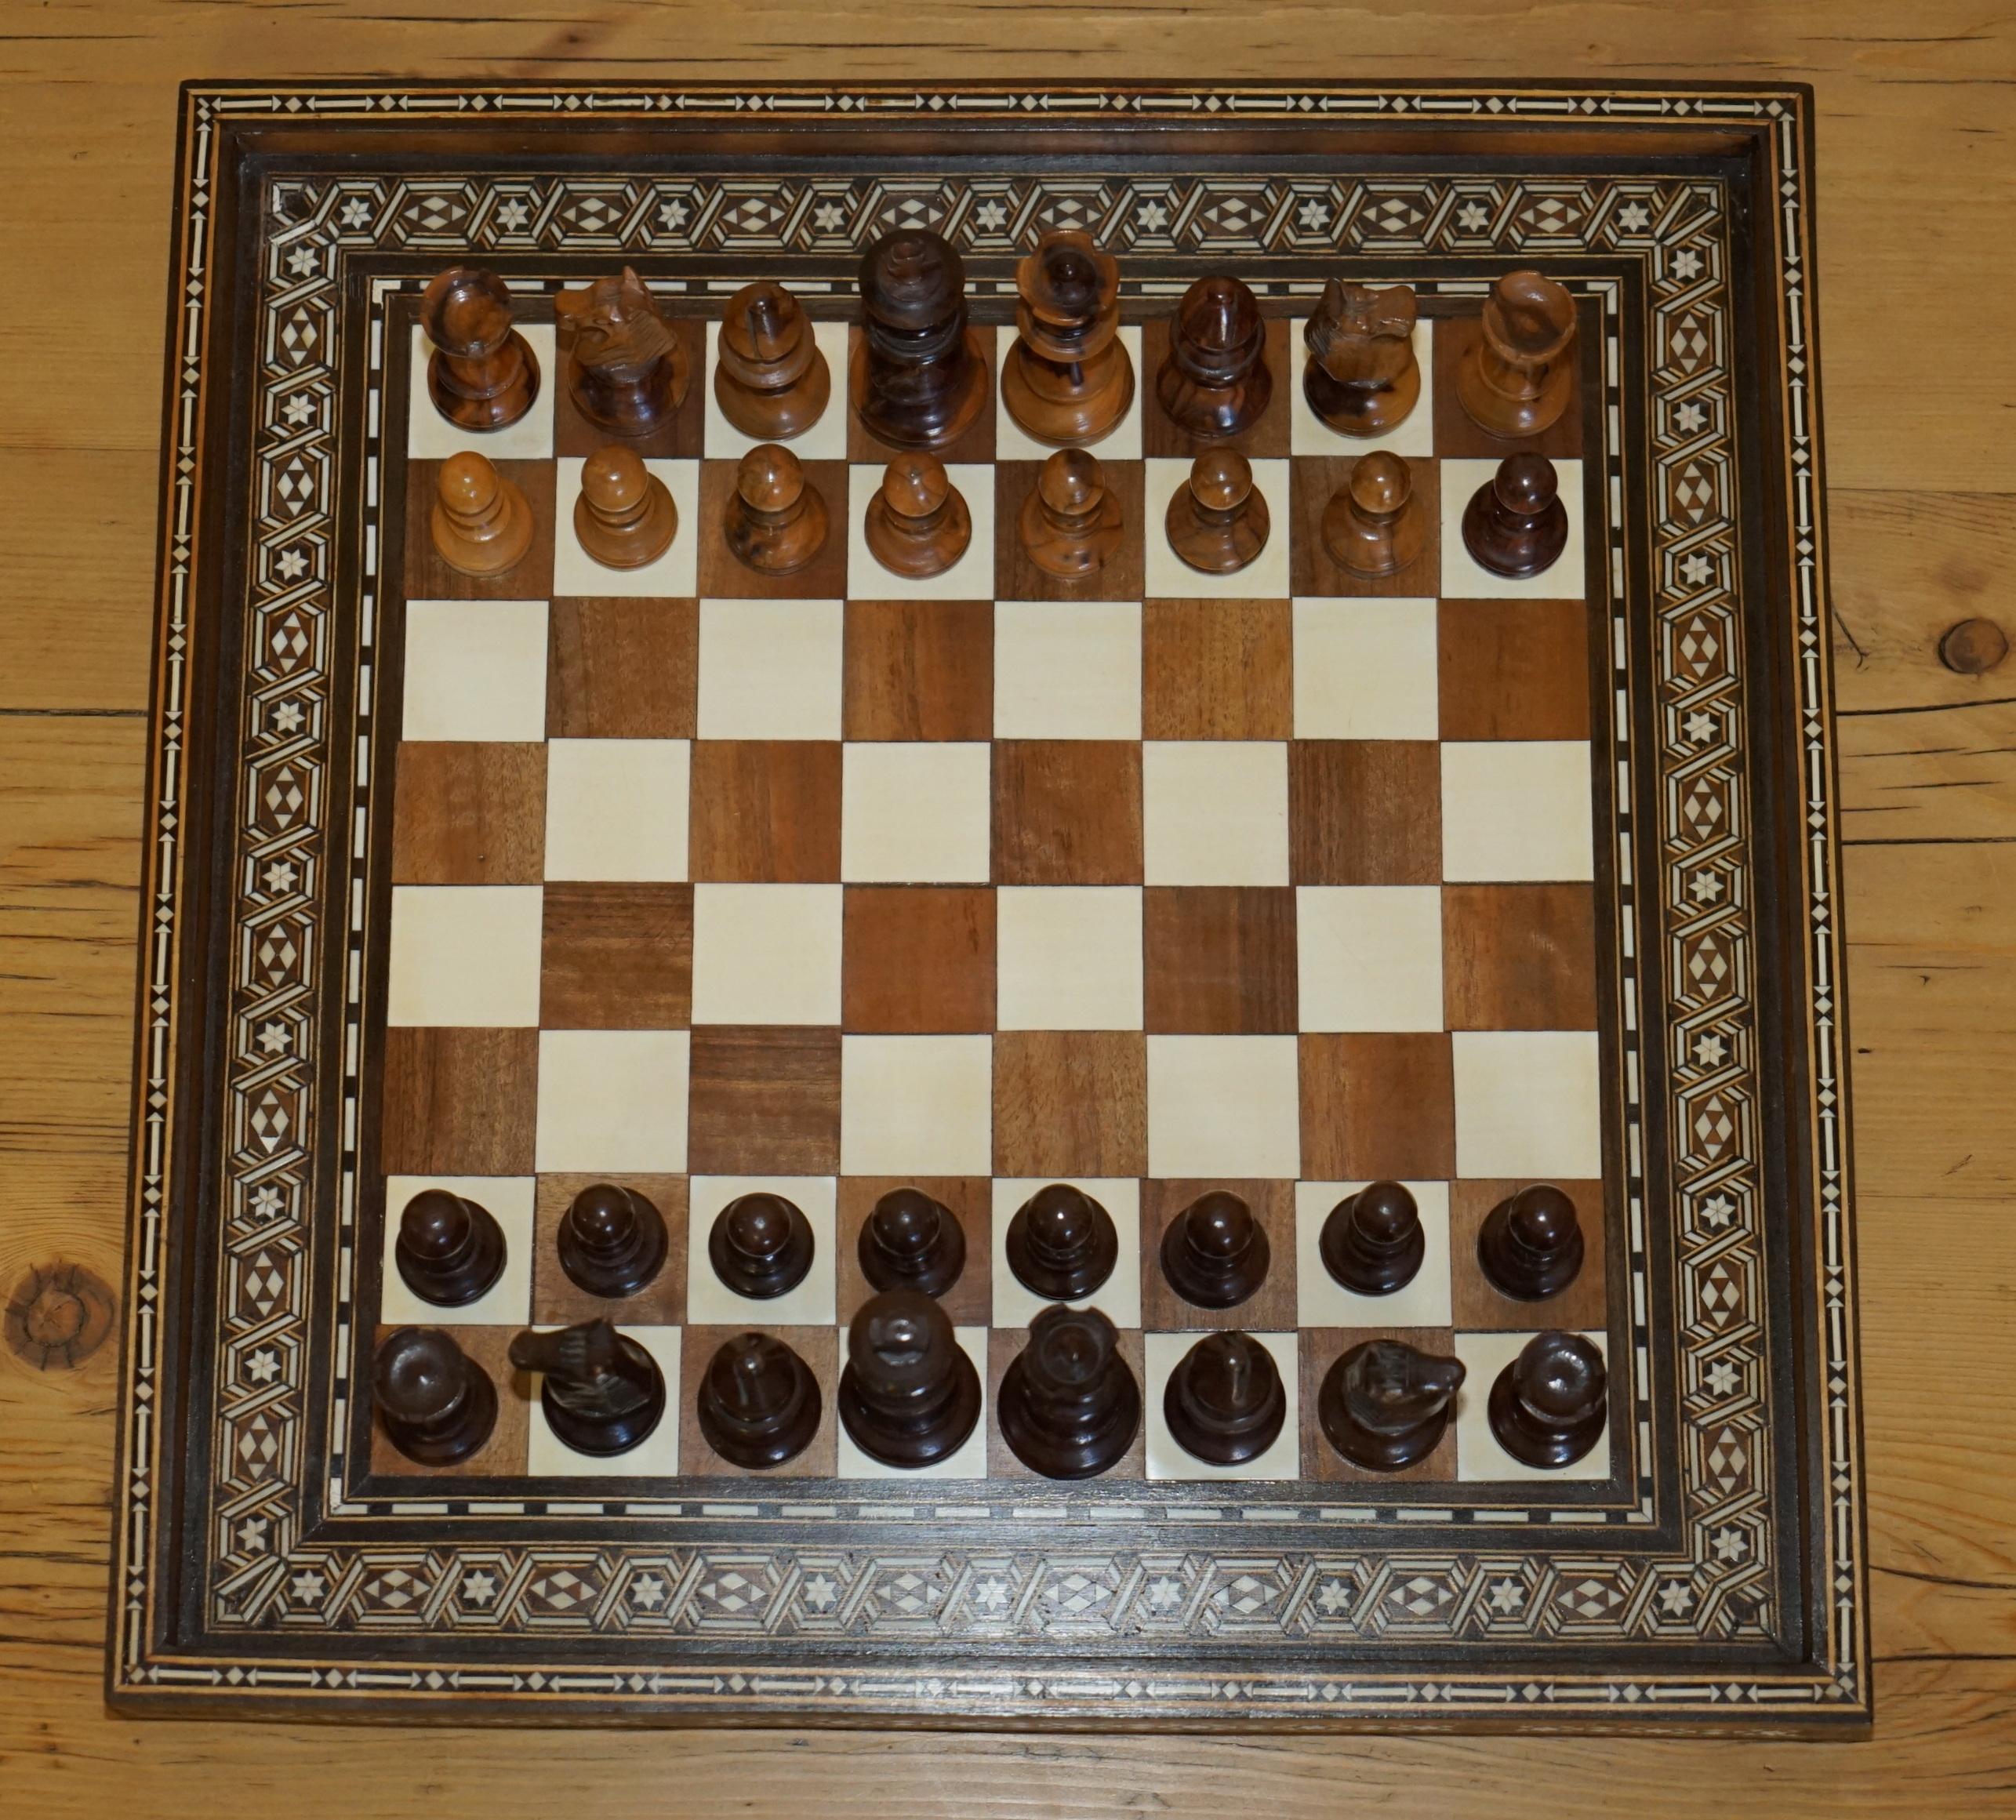 Royal House Antiques

Royal House Antiques is delighted to offer for sale this extremely rare circa 1900 Anglo Indian Export Chessboard and pieces 

A truly stunning and highly collectable suite, the board is really a work of art and extremely